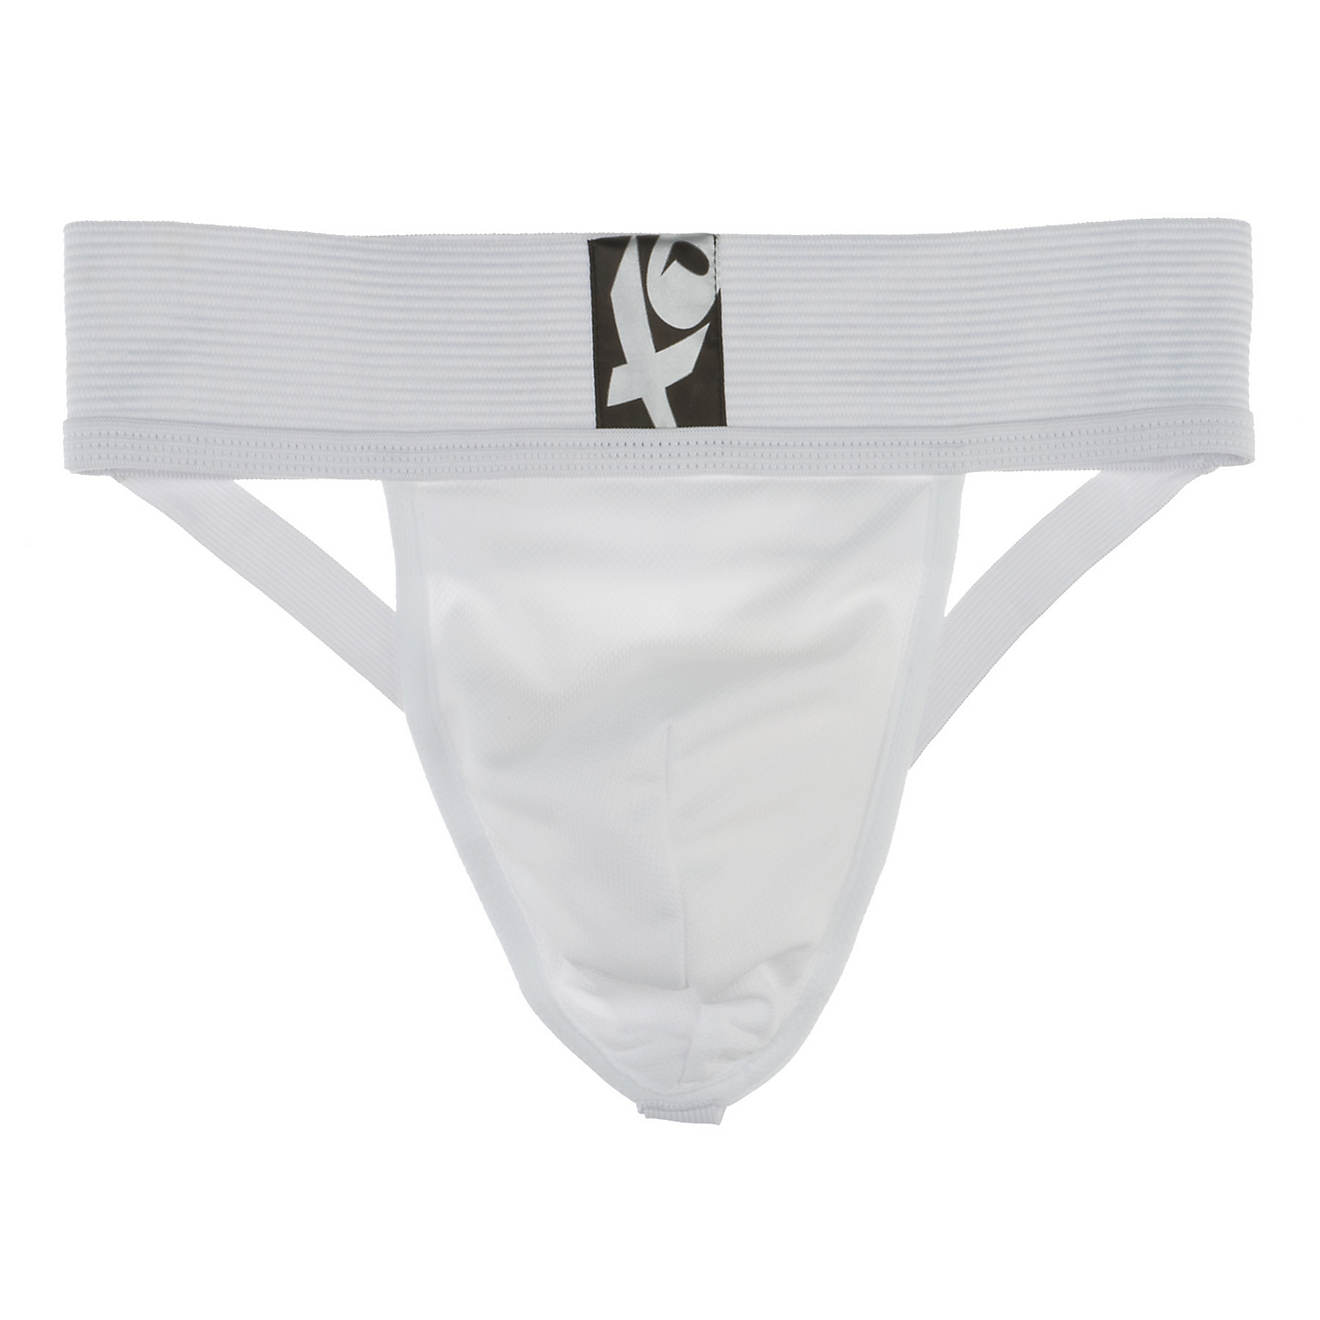 XO Men's ProSupporter Athletic Supporter                                                                                         - view number 1